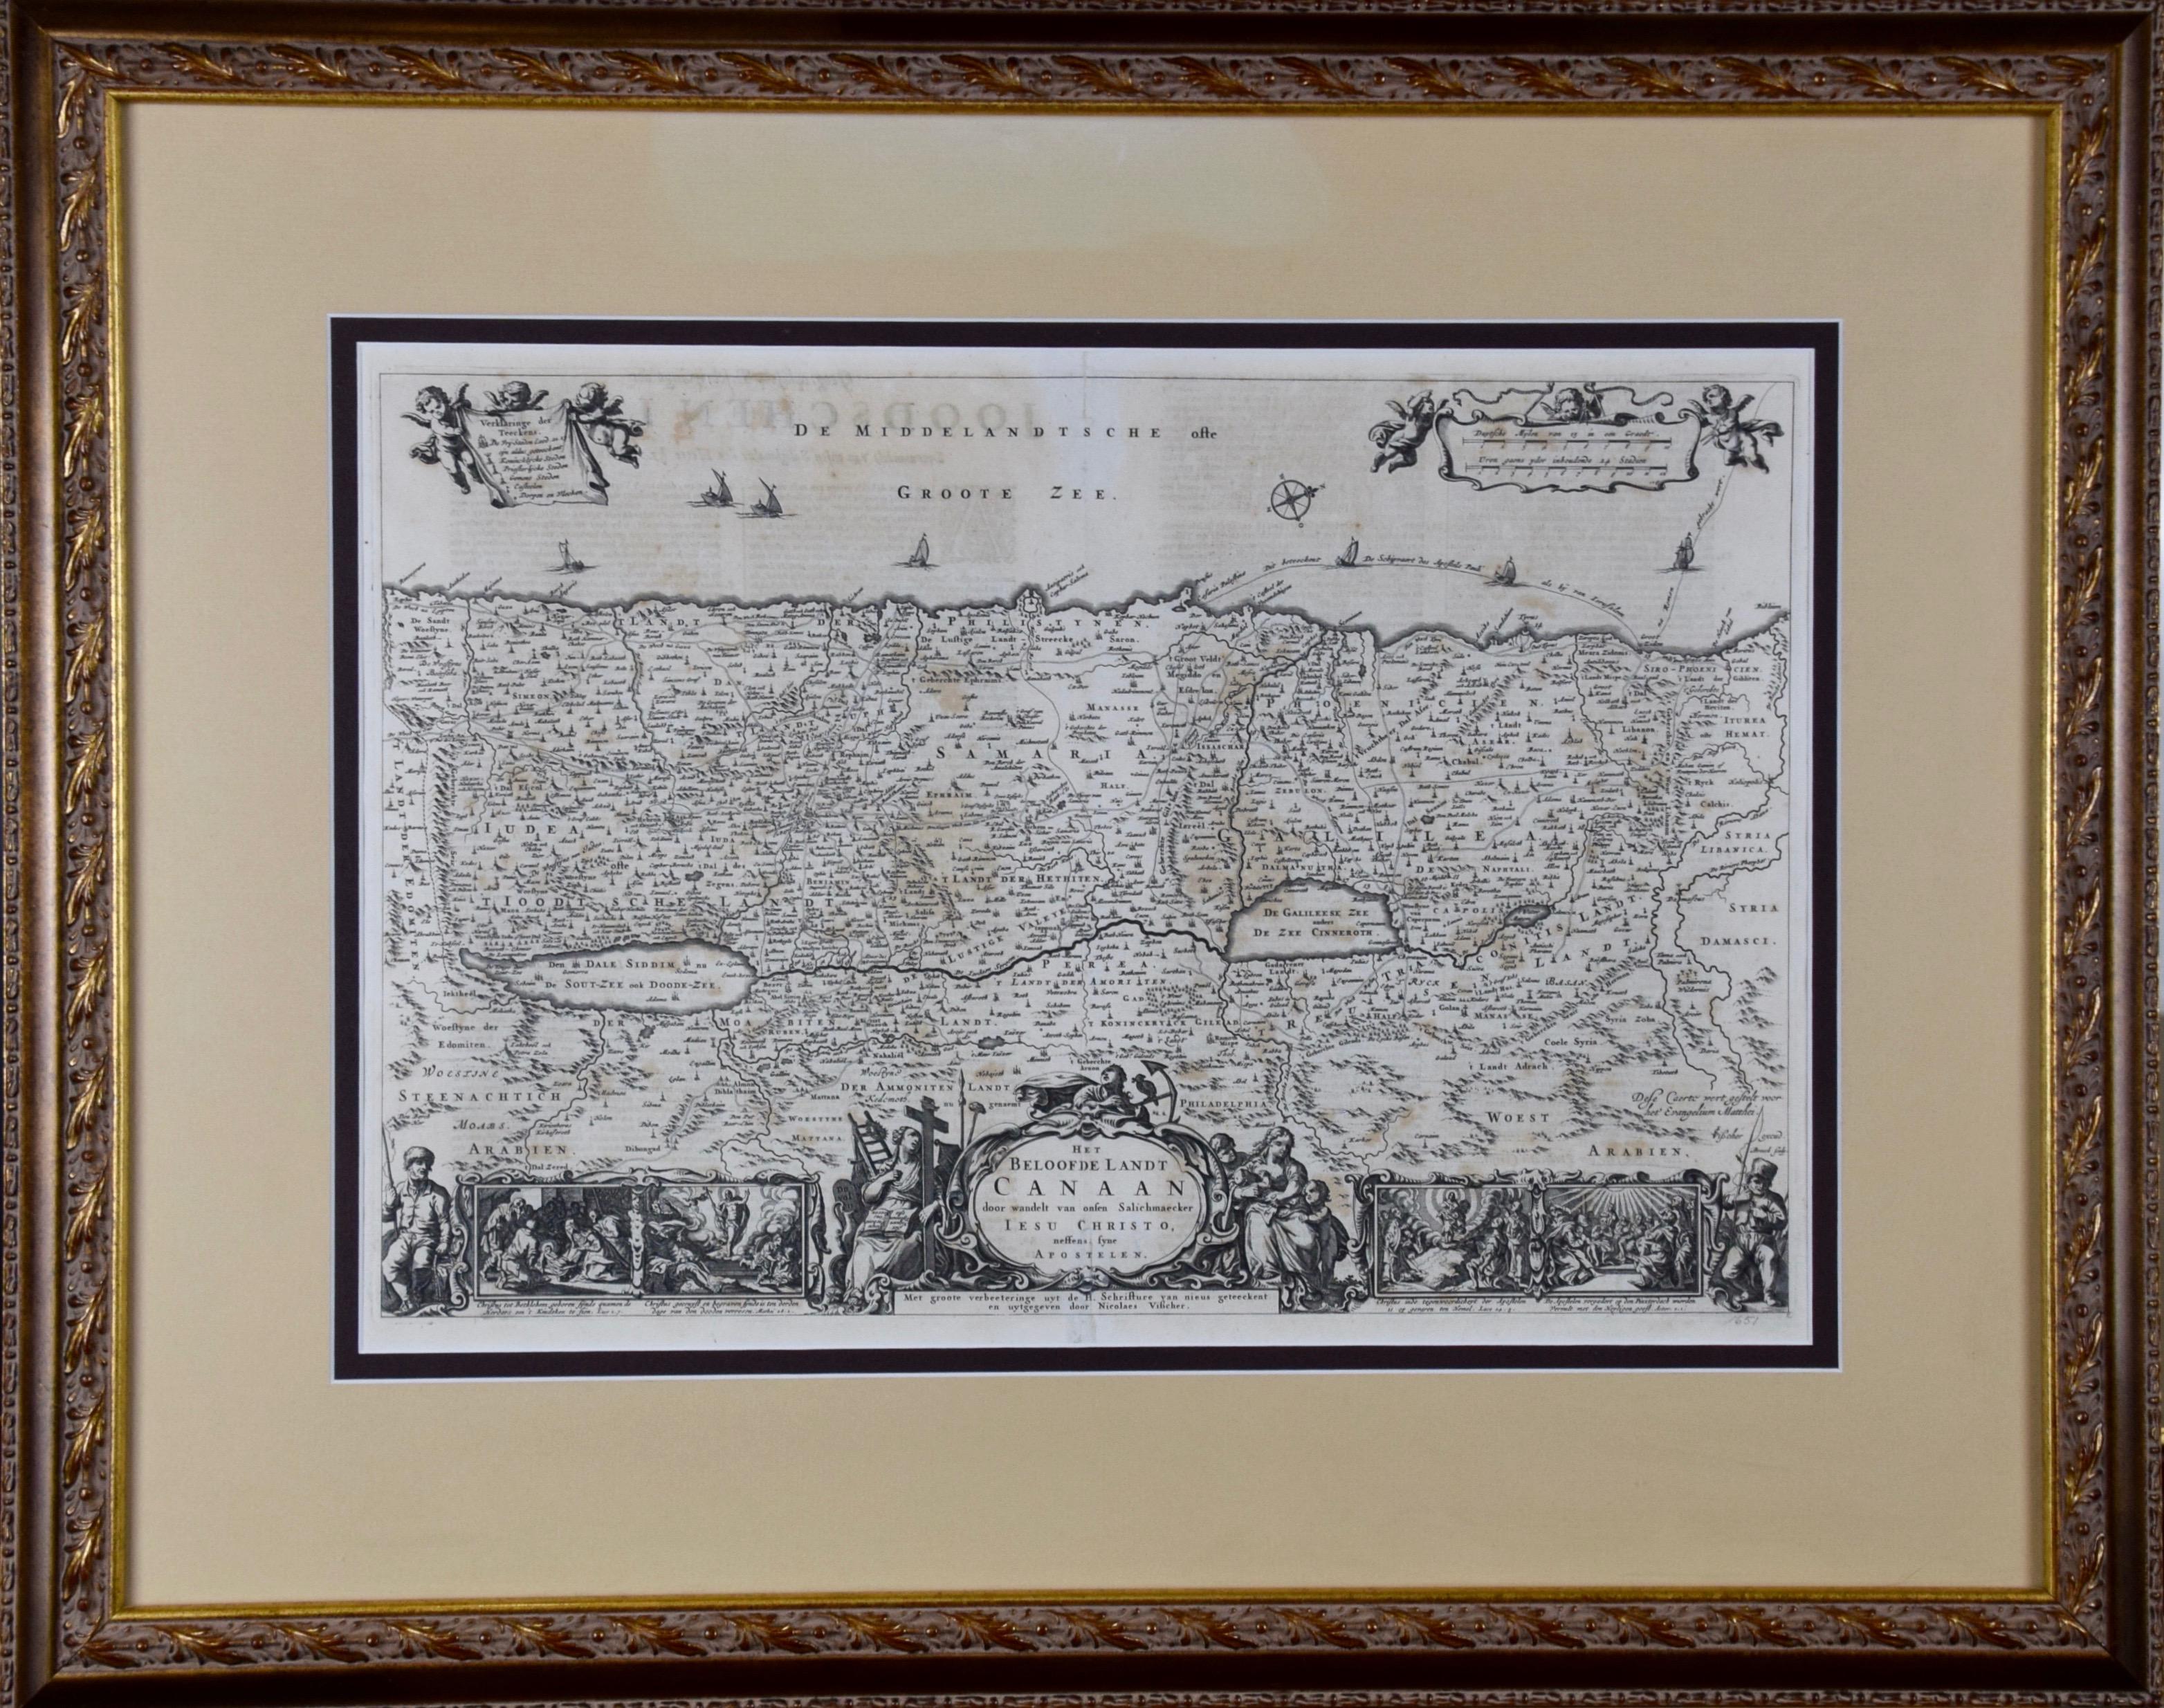 17th Century Dutch Map of the Holy Land at the Time of Jesus by Visscher - Print by Nicolaus Visscher